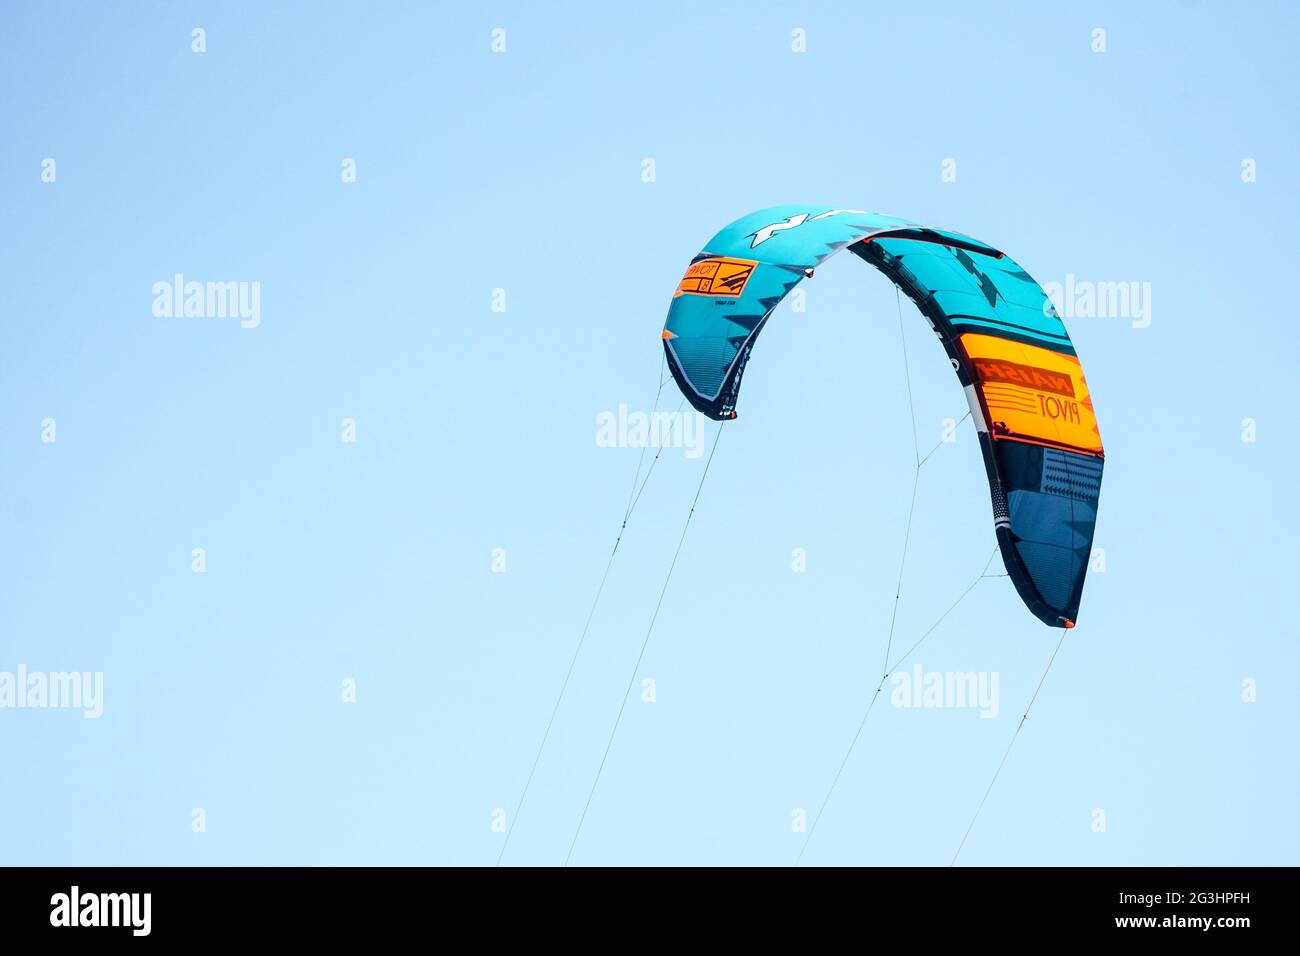 an open kite or parachute against a pale blue sky concept kiteboarding, kitesurfing, sport equipment, adrenaline sport, competition Stock Photo